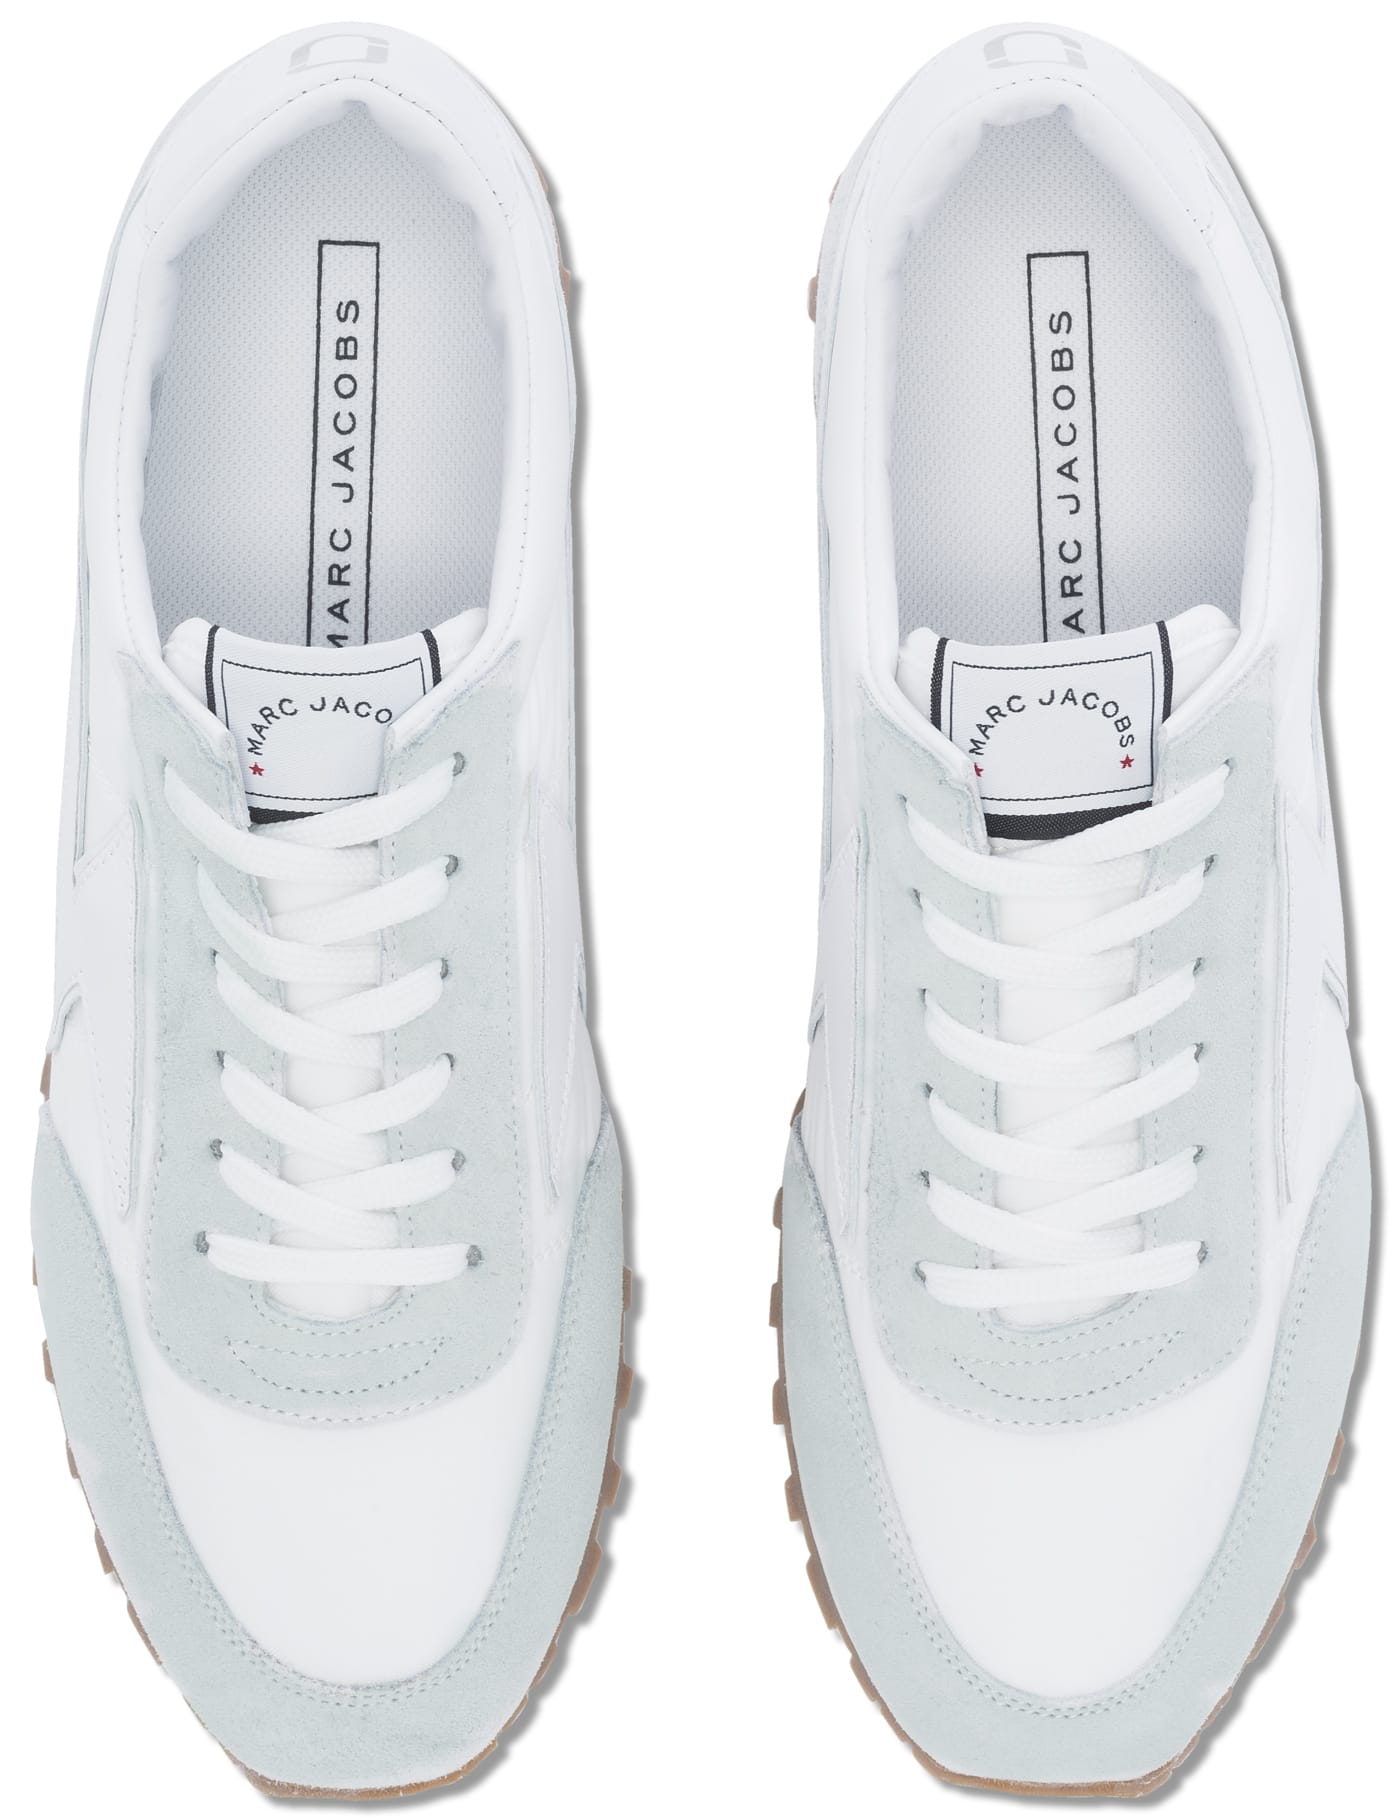 Heaven by Marc Jacobs & Dr. Martens Are Dropping Two New Shoe Styles — See  Photos | Teen Vogue